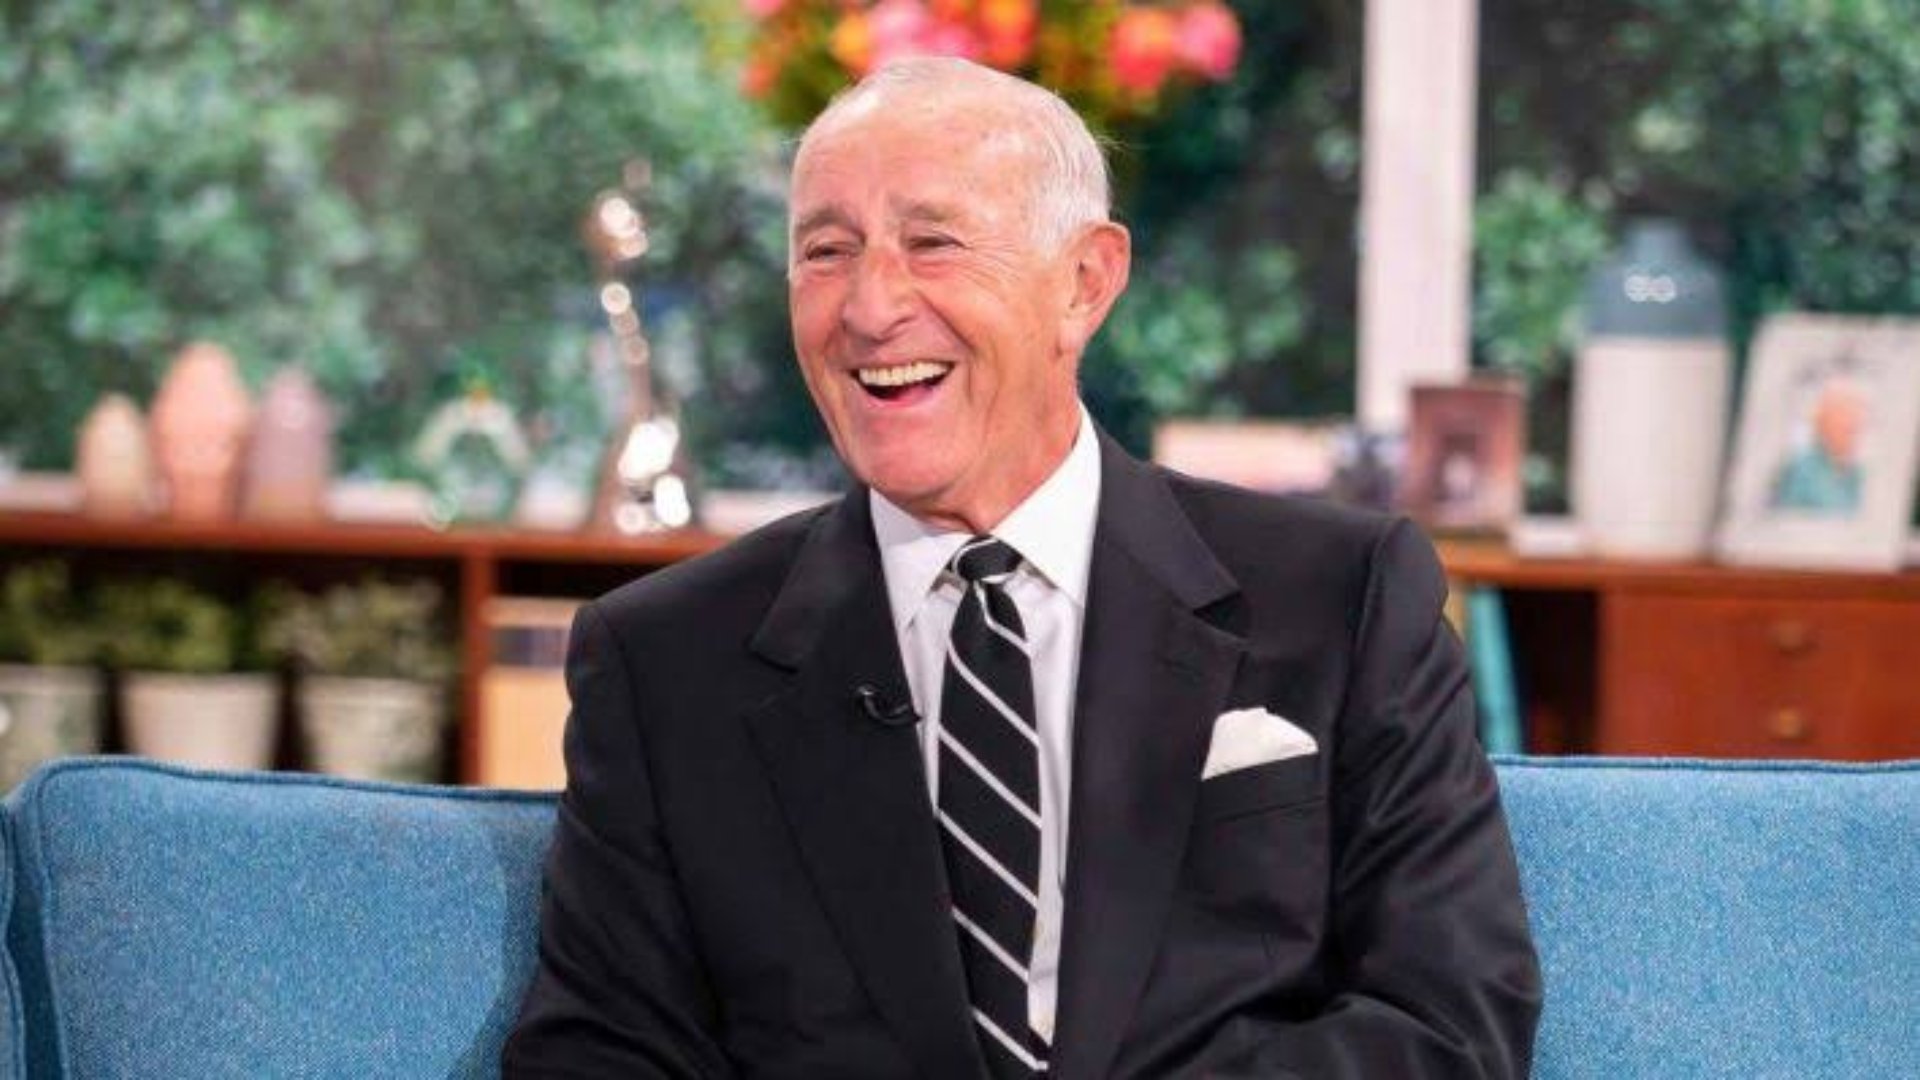 Len Goodman, Former 'Dancing with the Stars' Head Judge, Dead at 78